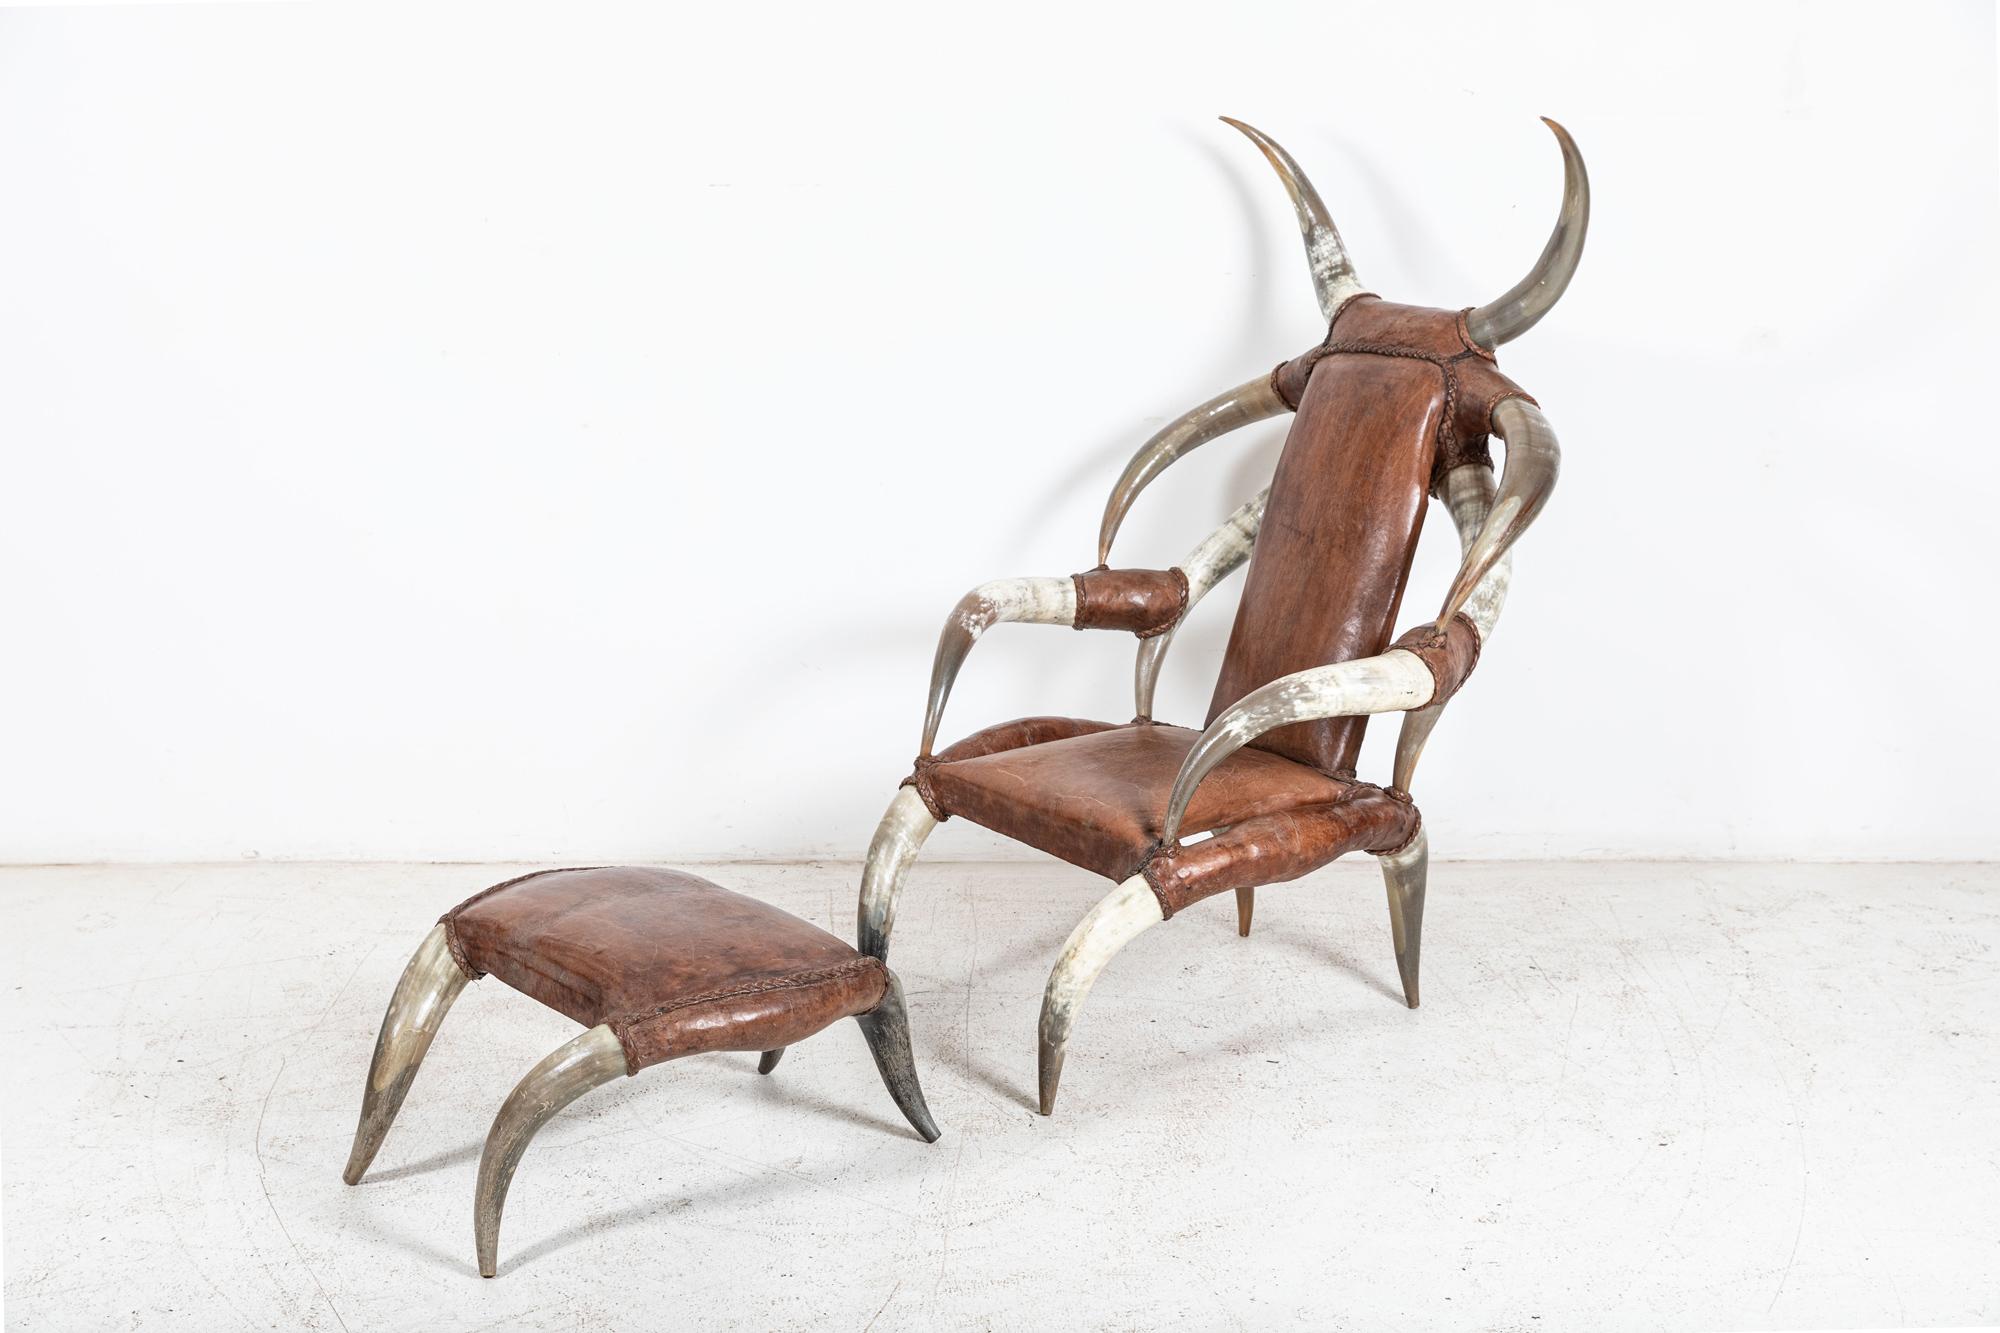 Circa 1960

Monumental Horn & Leather Armchair with Foot Stool. An Outstanding Sculptural & Decorative American Longhorn Steer Armchair with Matching Footstool.

Provenance: Manor House - Ipswich England

sku 913

Armchair: H134 x W89 x D96
44 cm